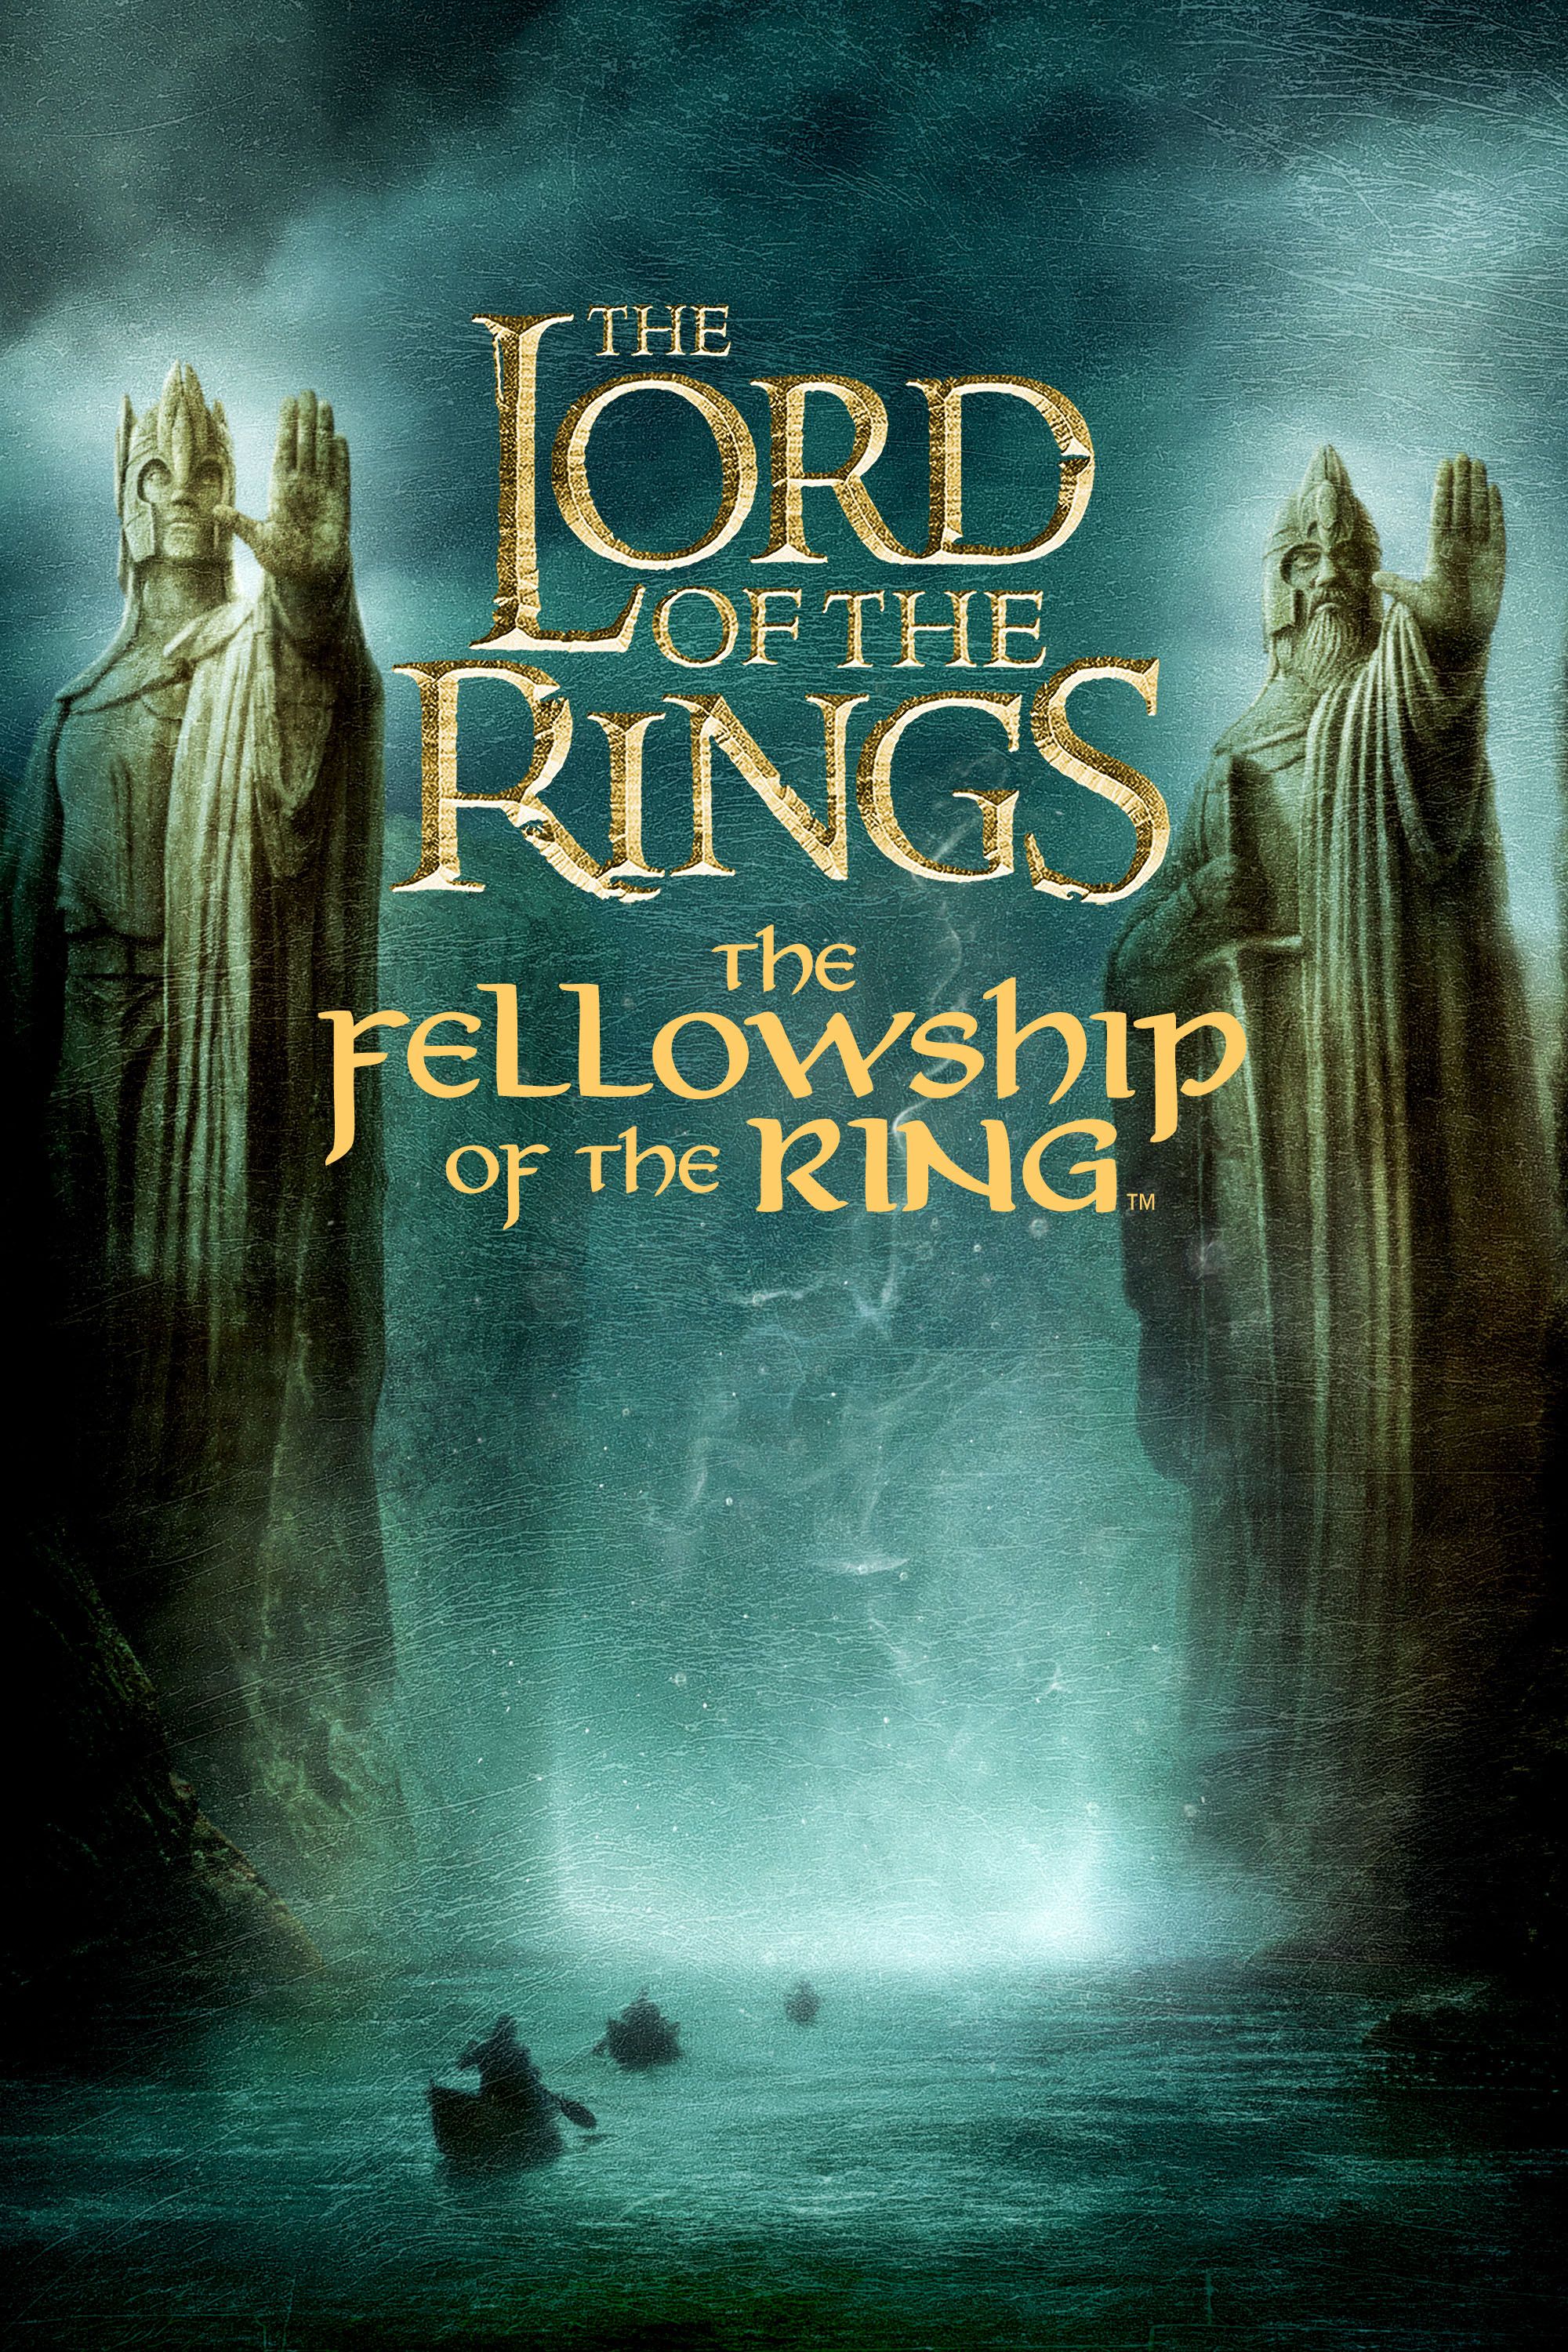 The Lord of the Rings: The Fellowship of the Ring | Full Movie | Movies Anywhere